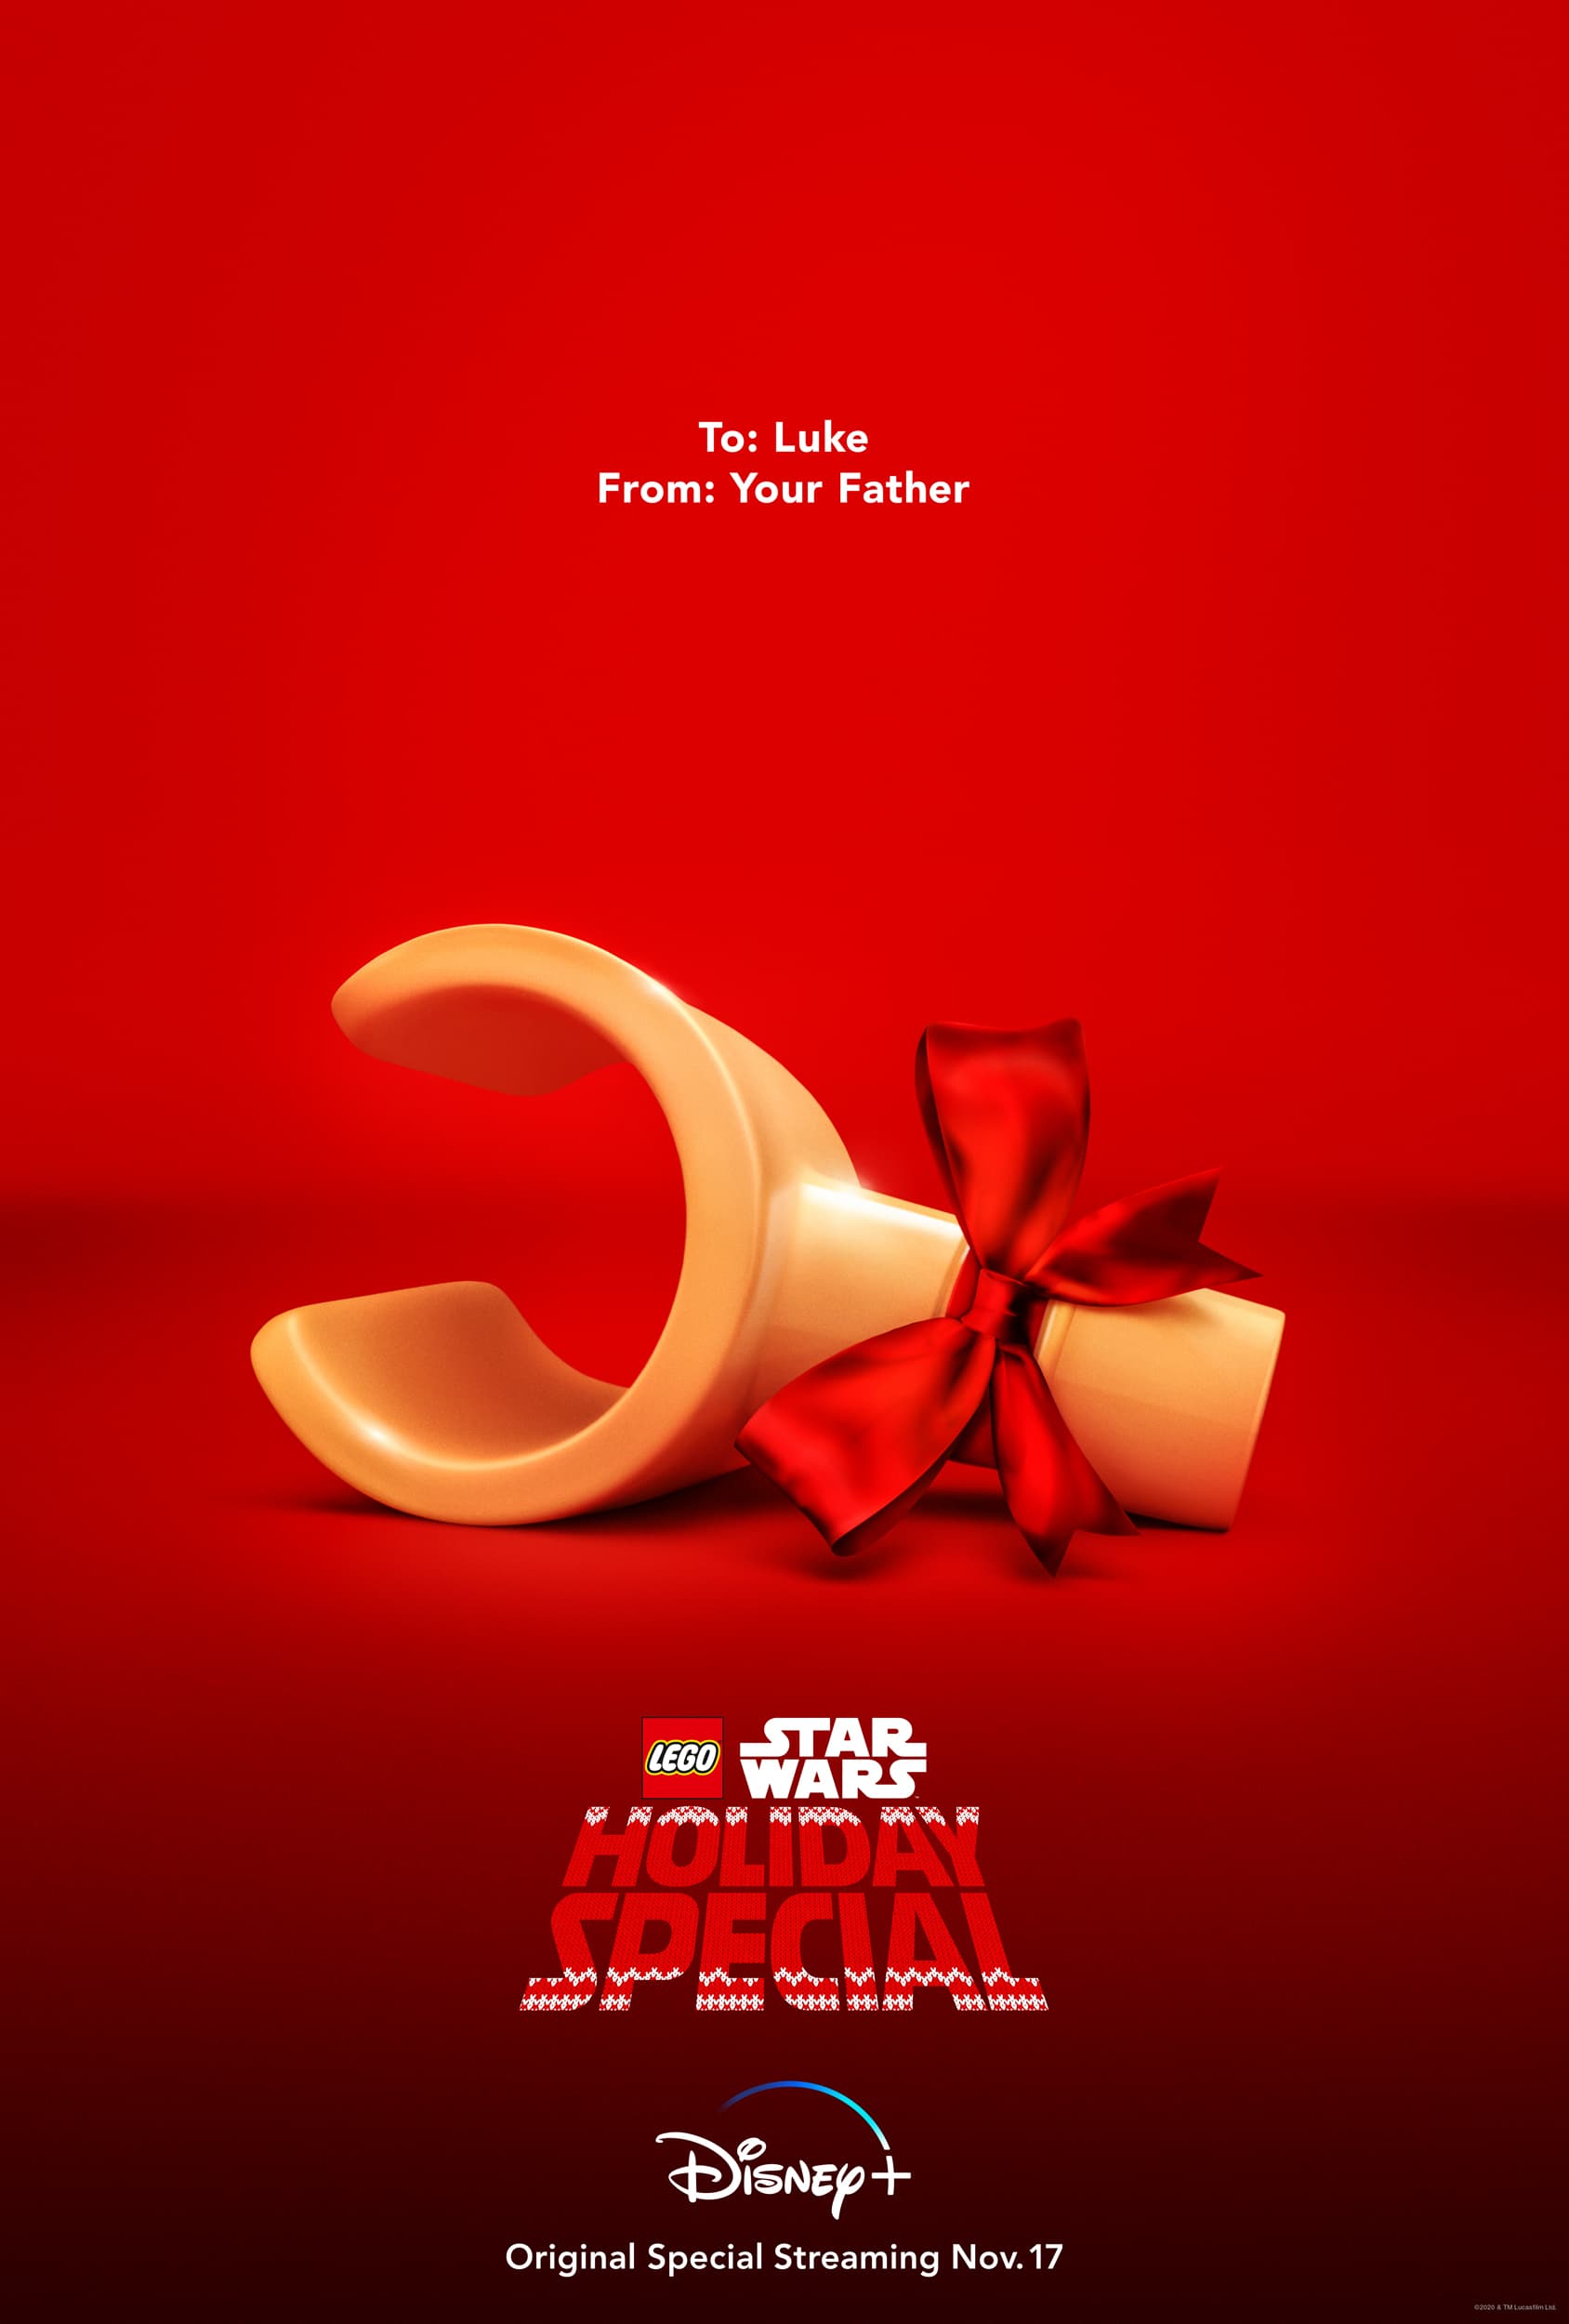 Lego Star Wars Holiday Special Coming to Disney+